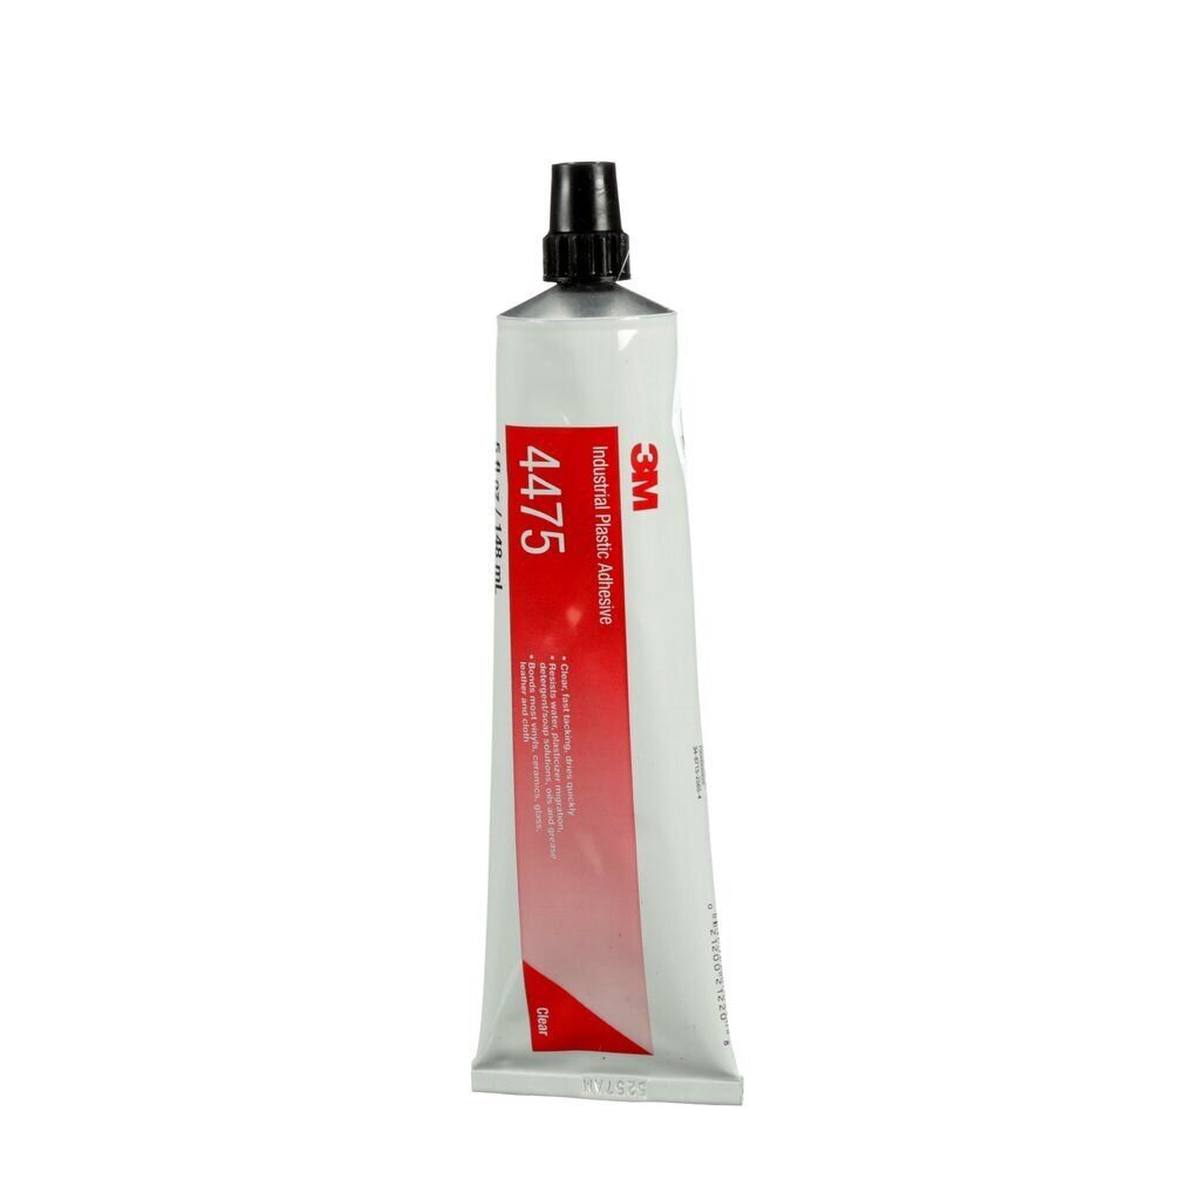 3M Scotch-Weld 4475 is a multipurpose copolymer based adhesive with 150ml